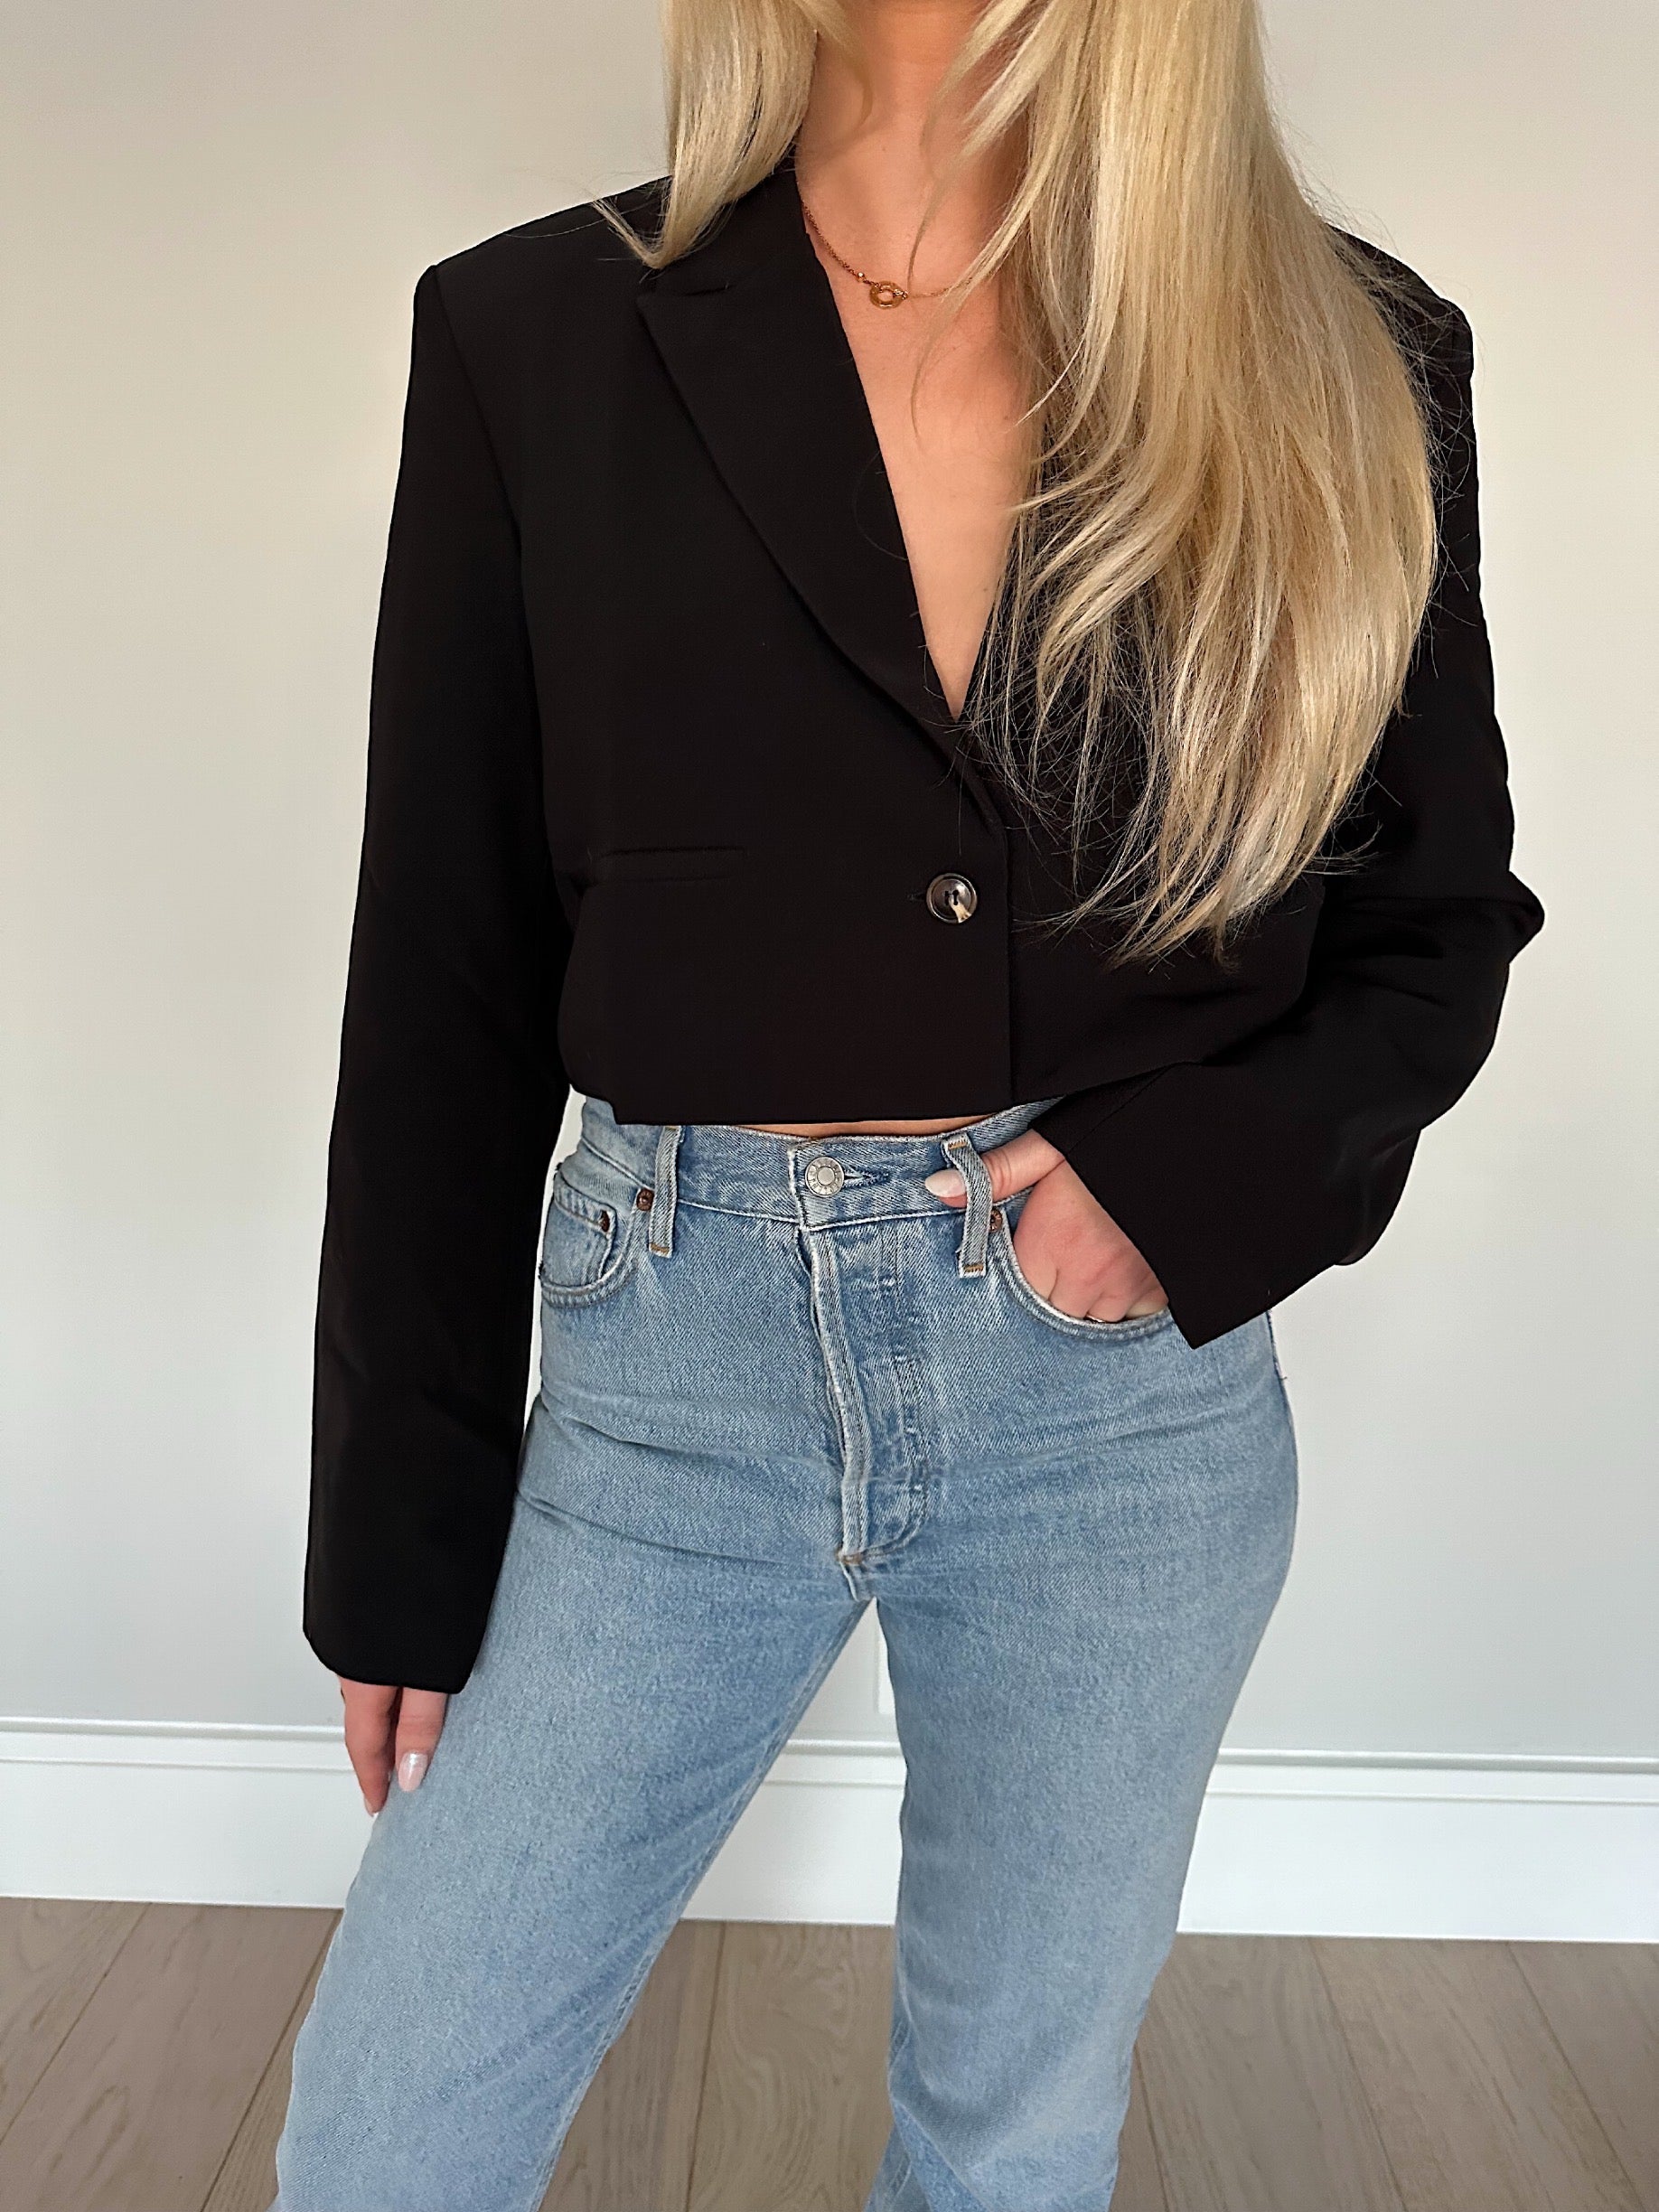 Cropped blazer. Oversized, boxy fit. Single breasted. Collar neckline. Long sleeves. Front button closure. Faux front pockets. Fully lined